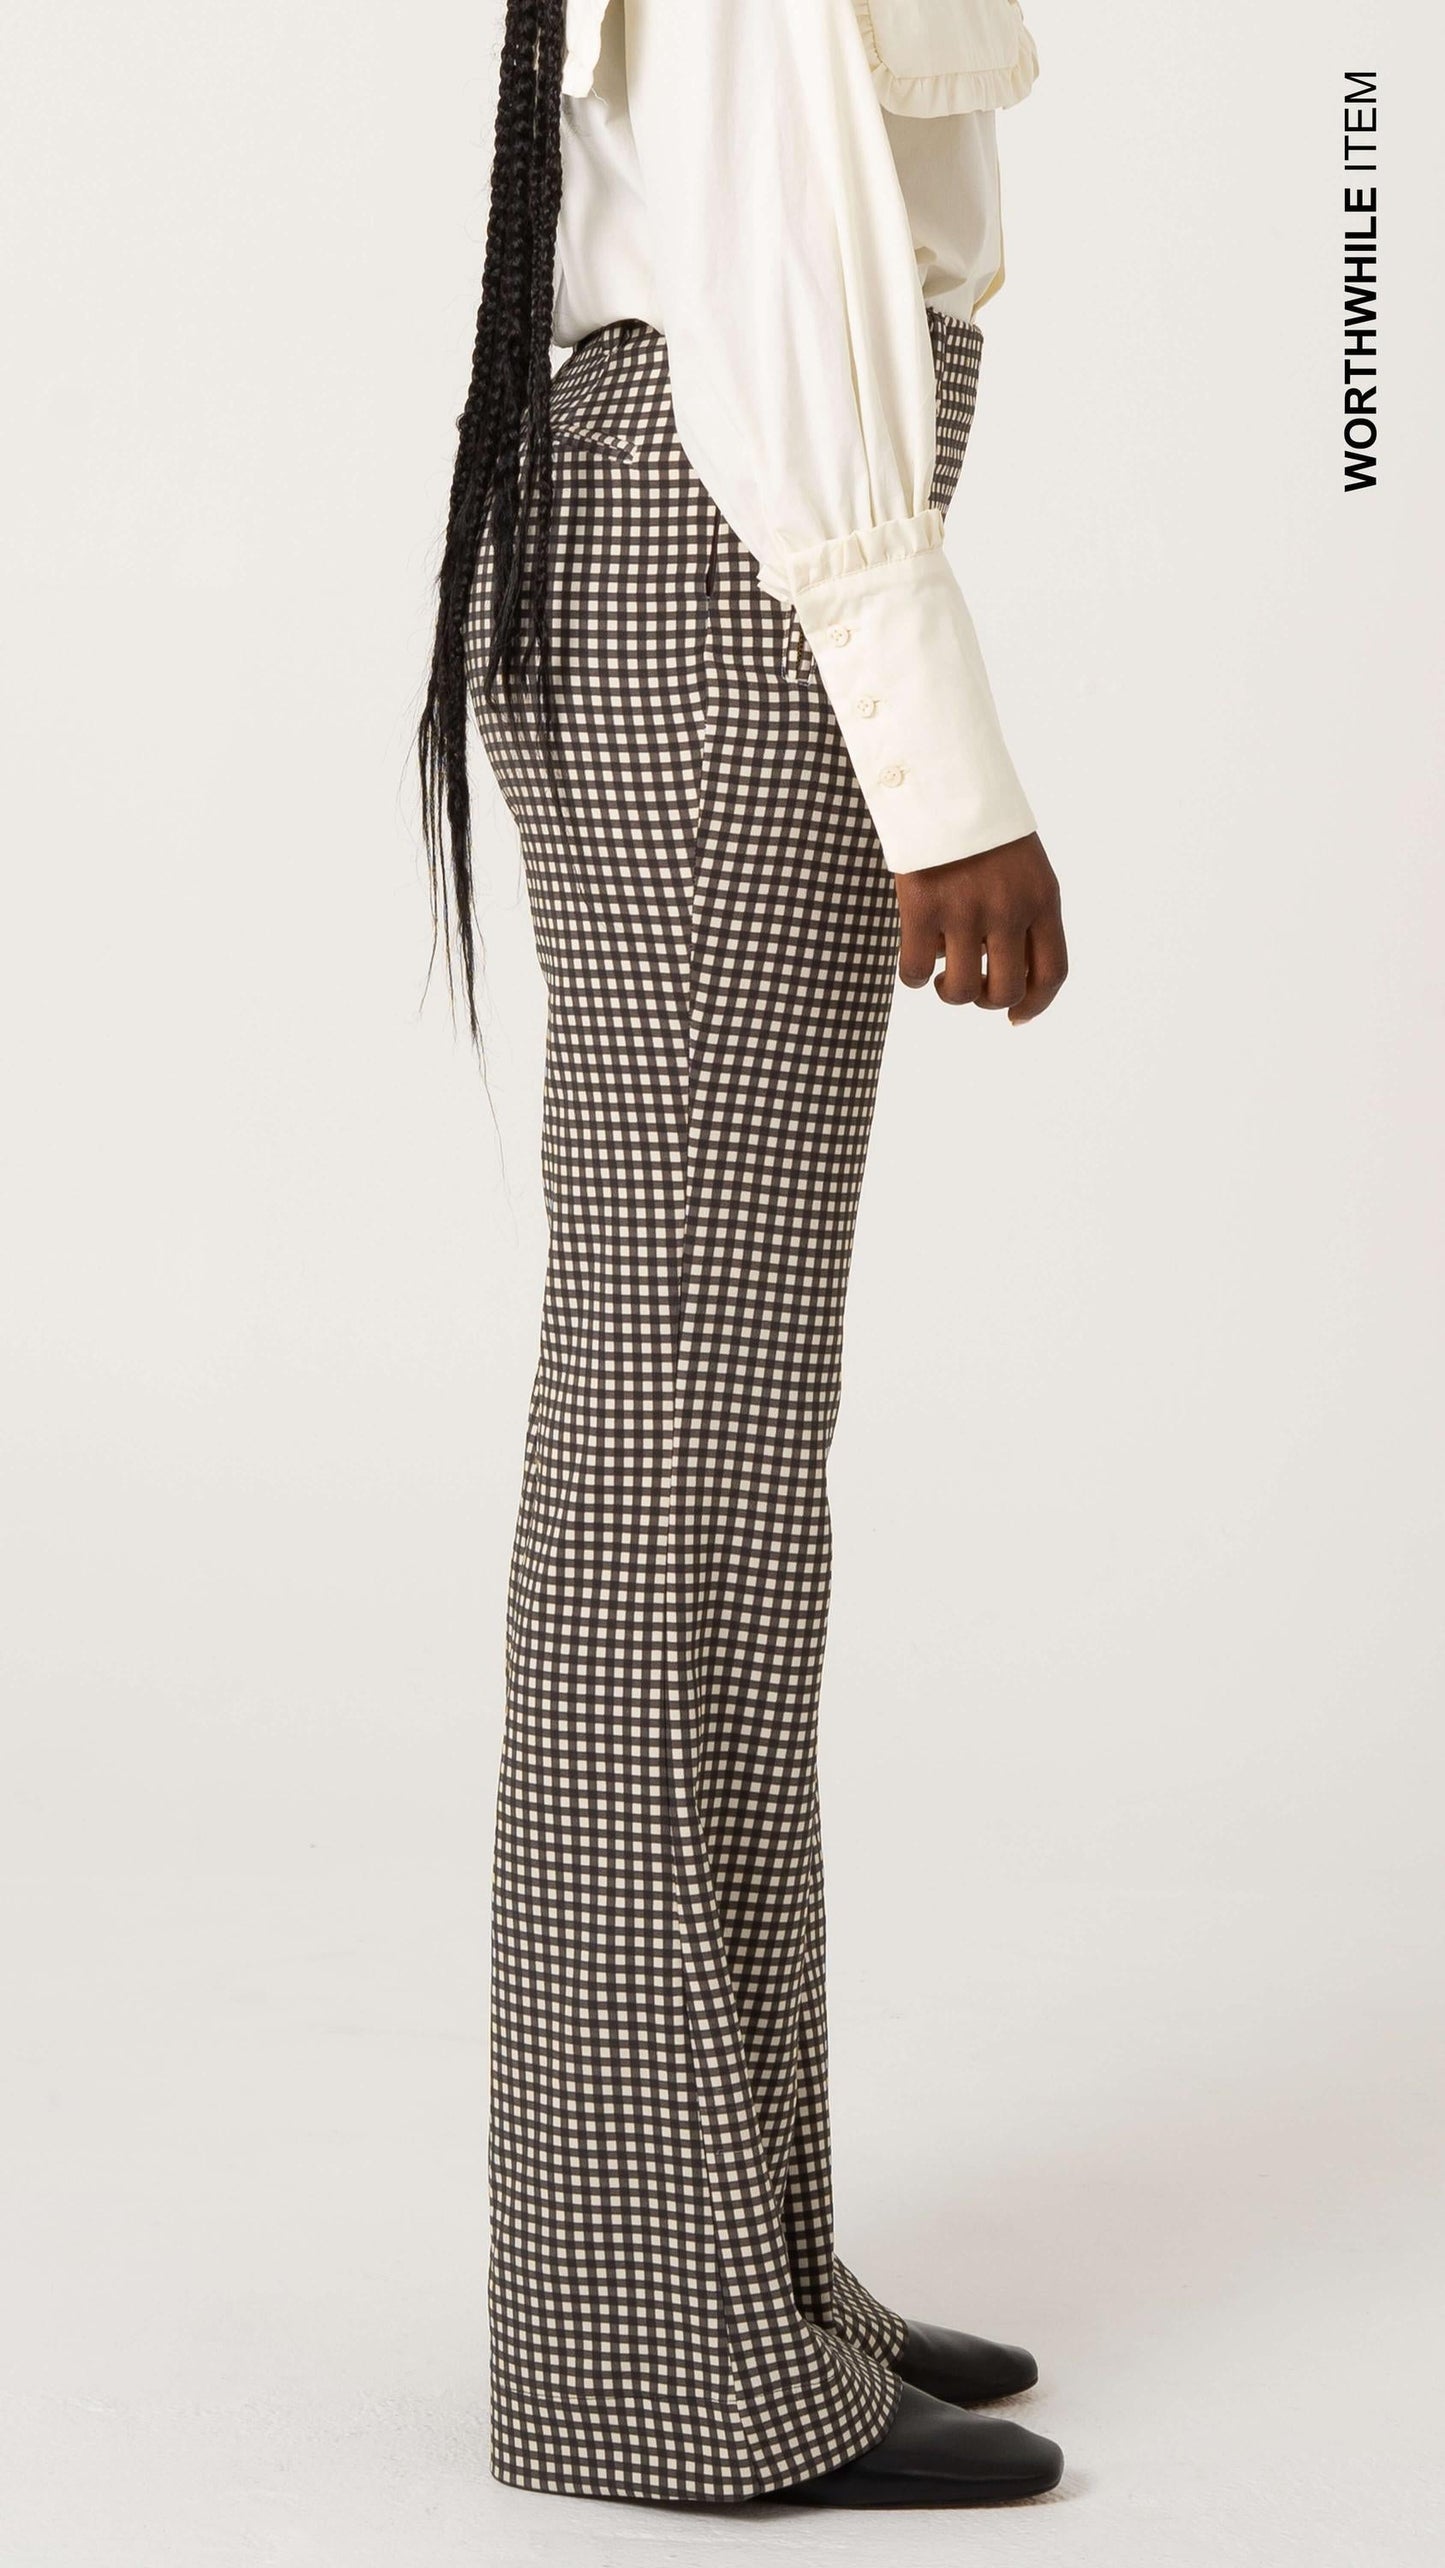 Gingham flared pants